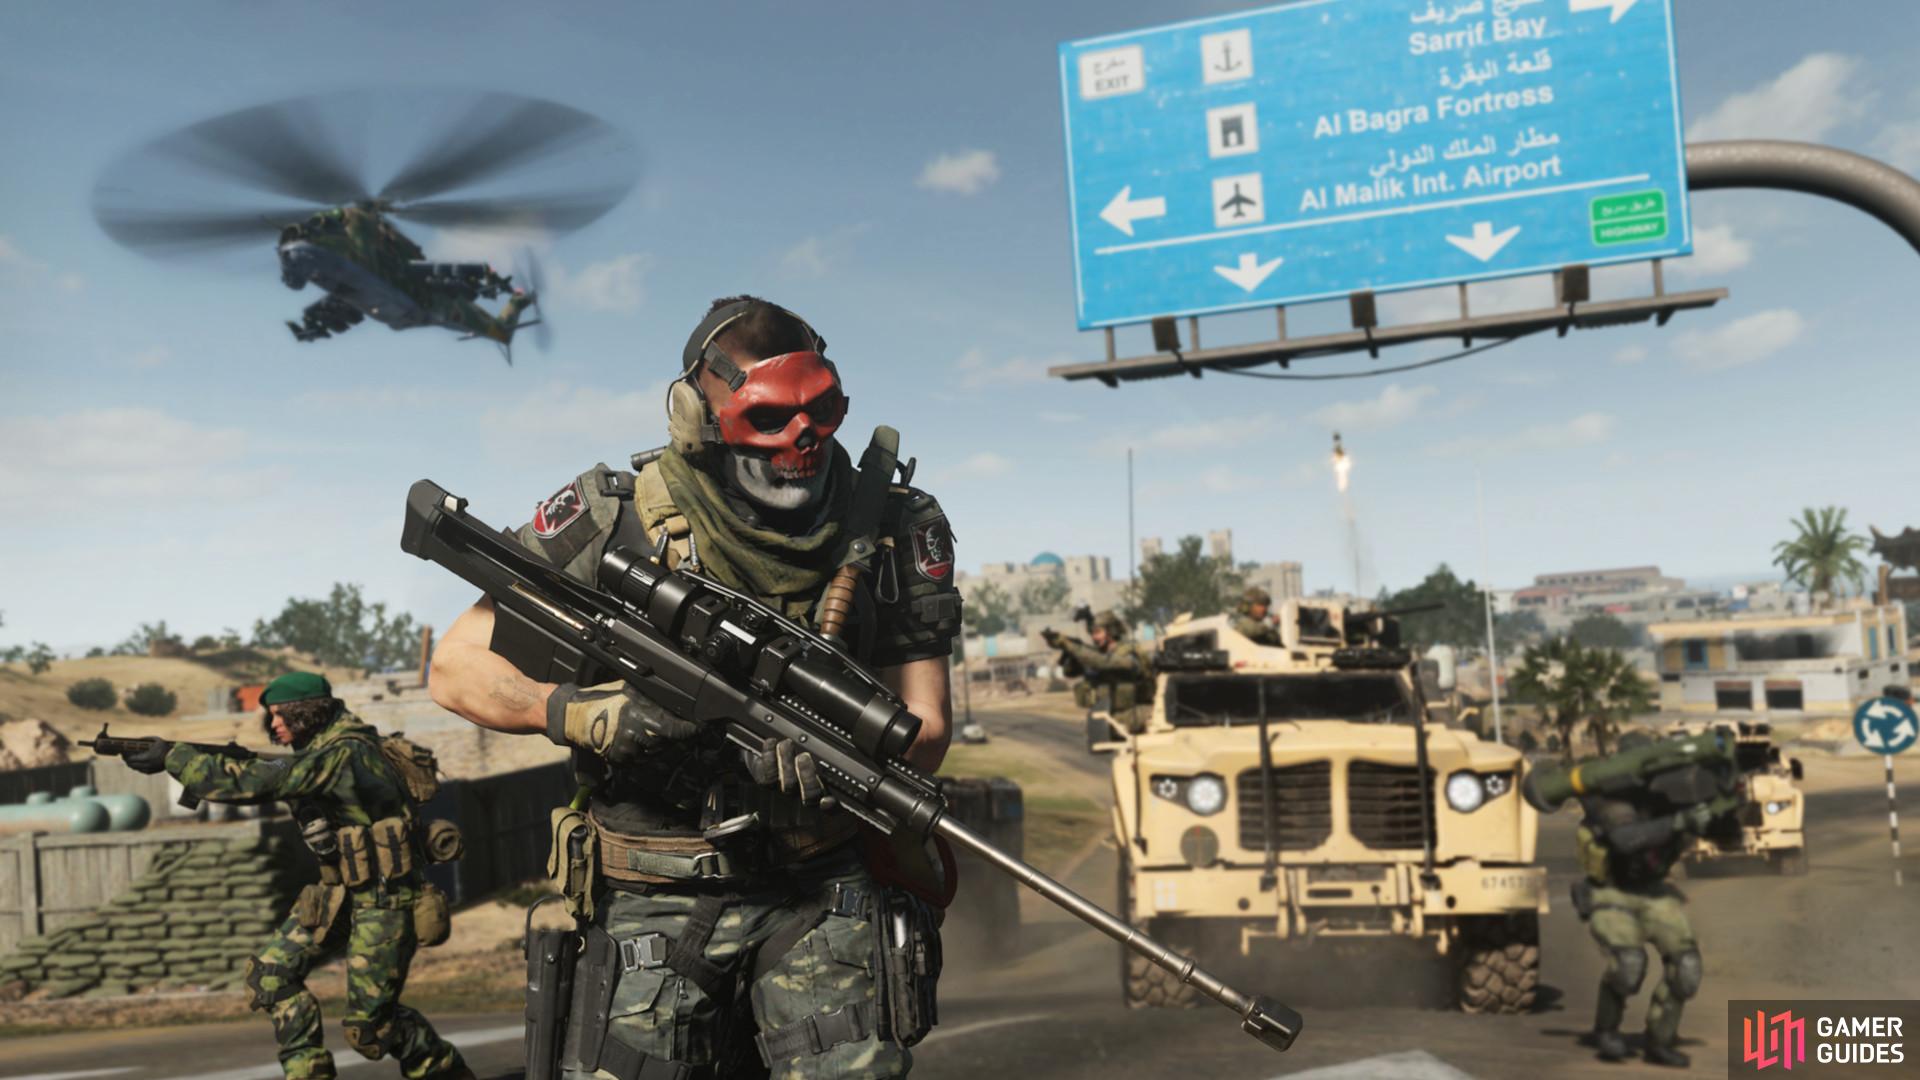 Soap's playable multiplayer character is considered an Operator, as are many more. Image via Activision.